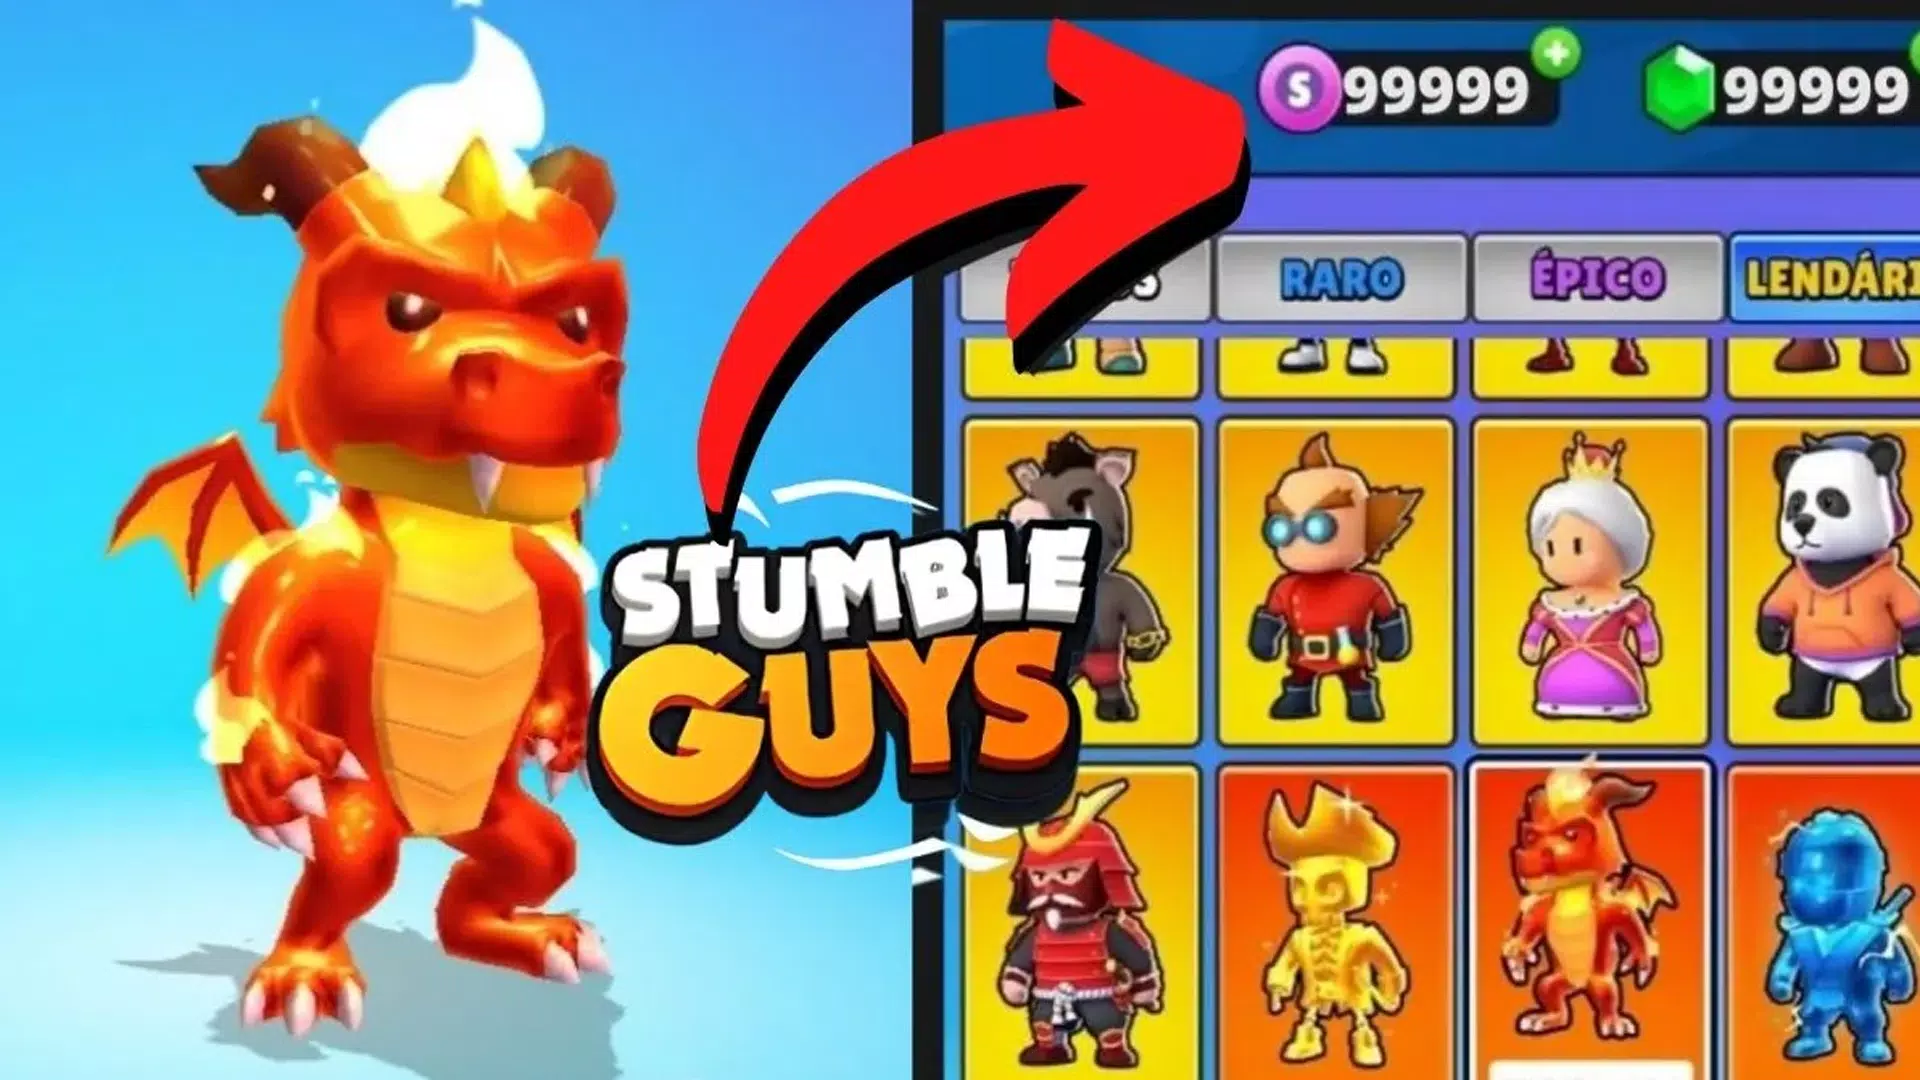 Stumble Guys APK MOD 0.50.3 Download For Android - Gizmoreel